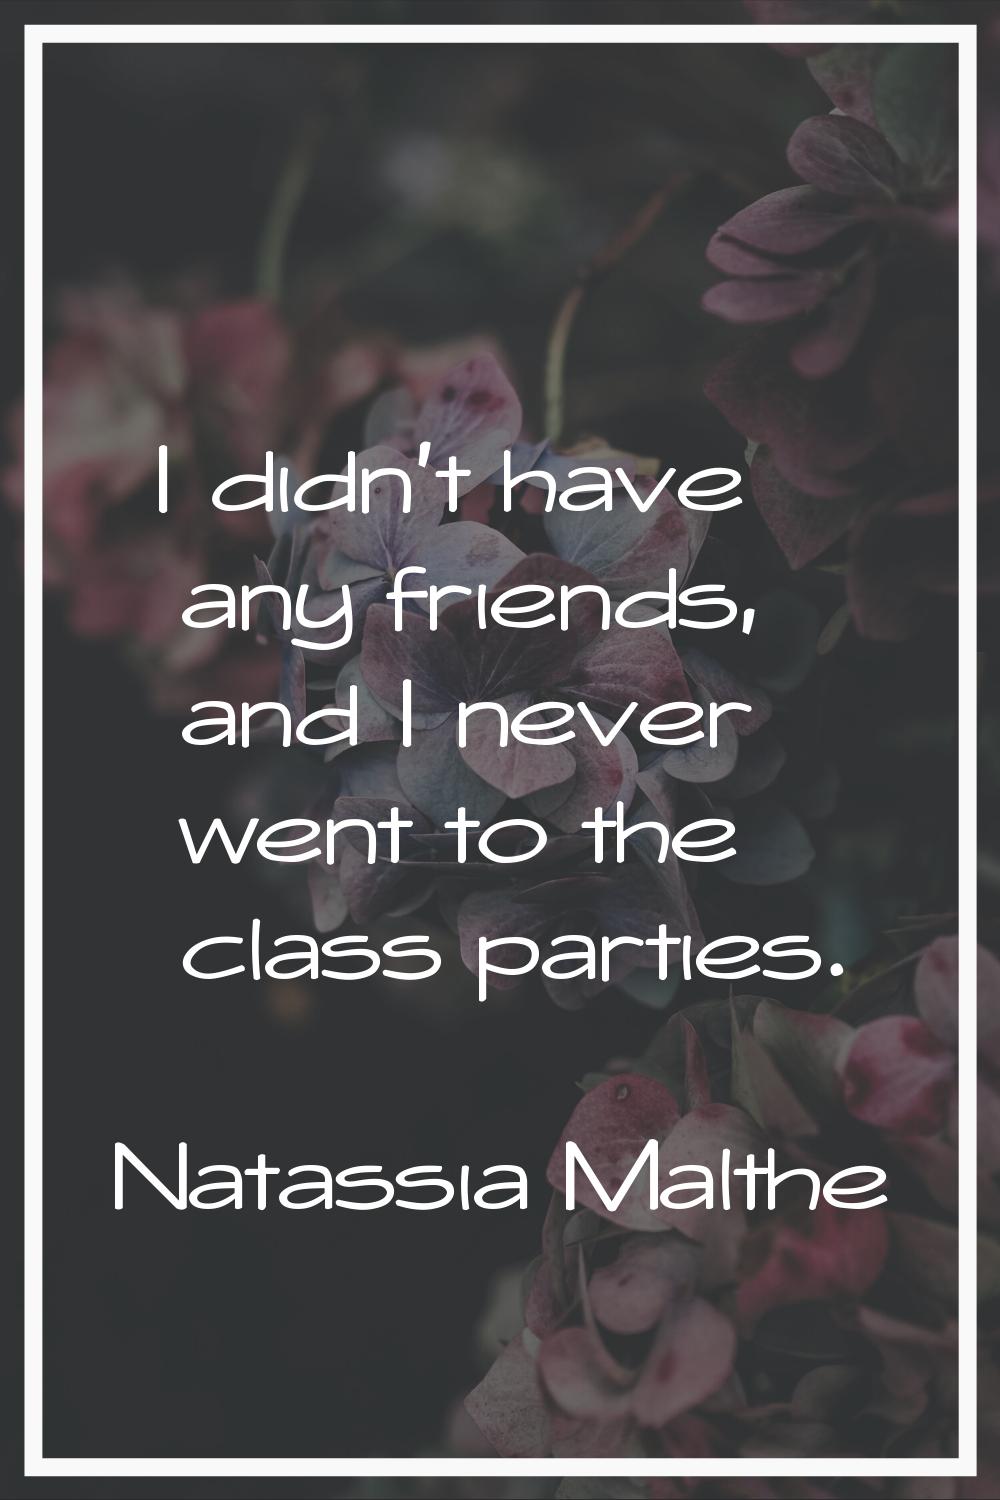 I didn't have any friends, and I never went to the class parties.